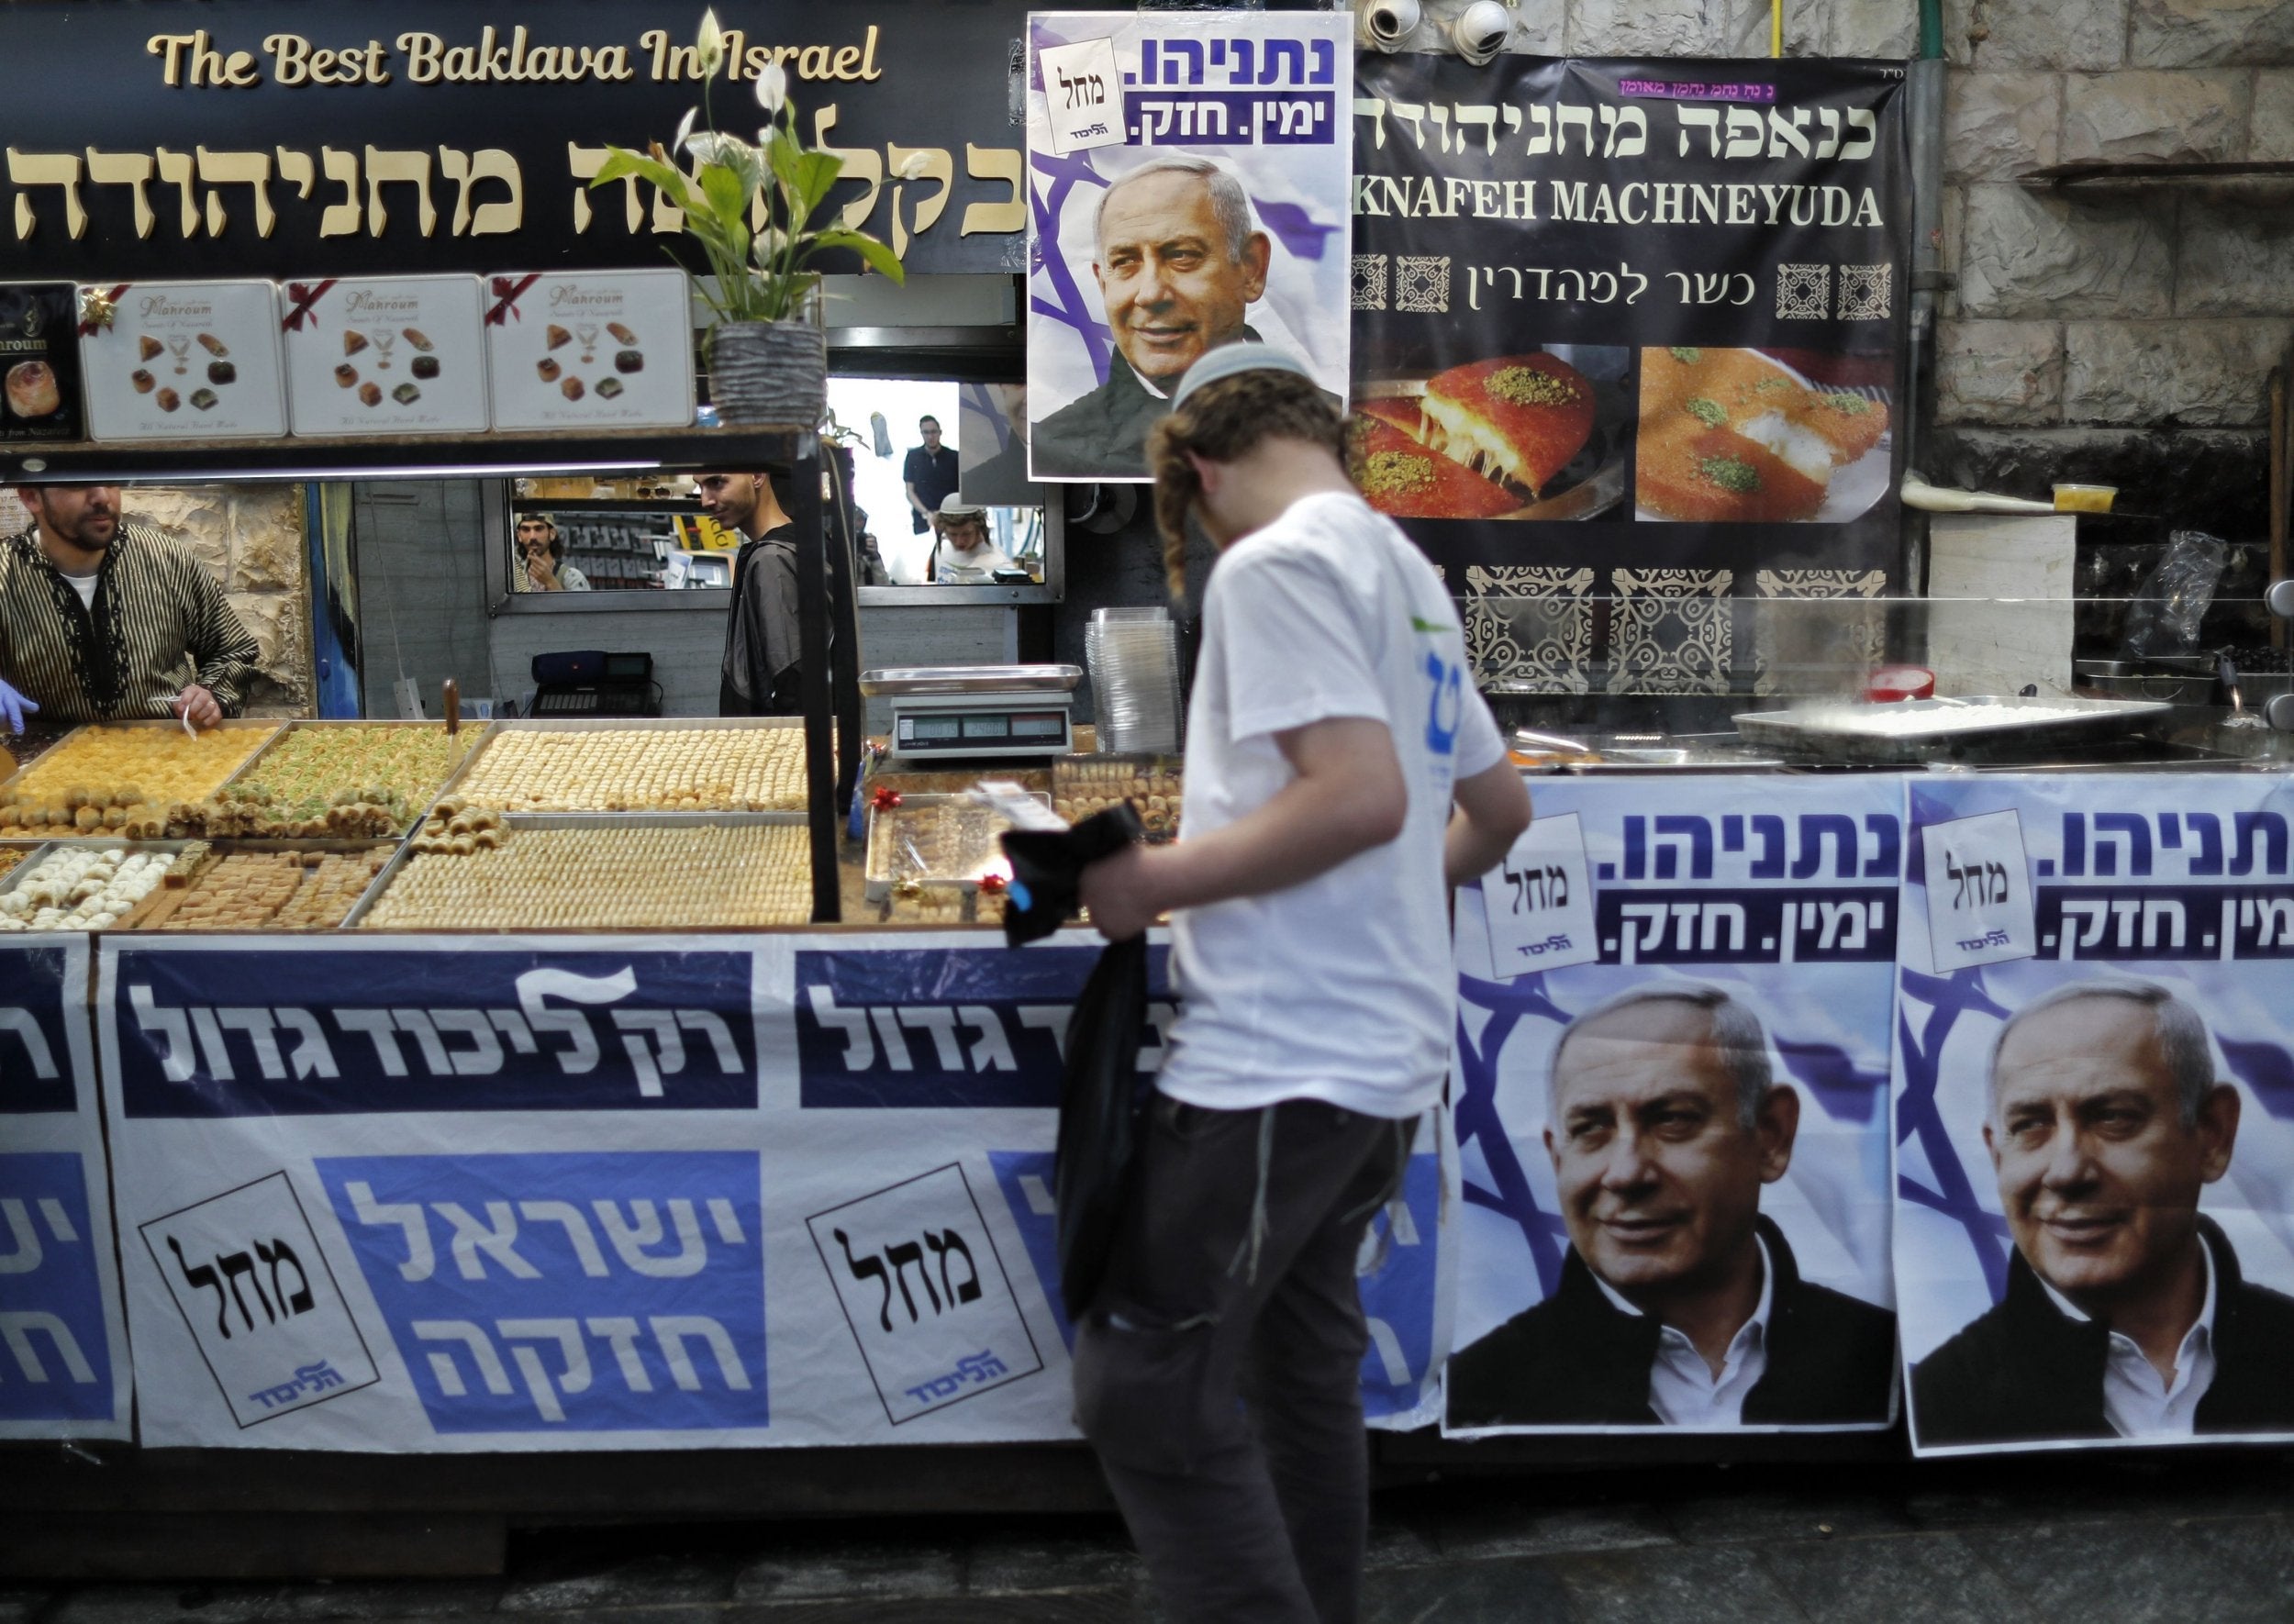 An Israeli settler walks past posters bearing the portrait of Israeli Prime minister Benjamin Netanyahu at the Machane Yehuda market in Jerusalem on April 8, 2019, a day ahead of the electoral polls